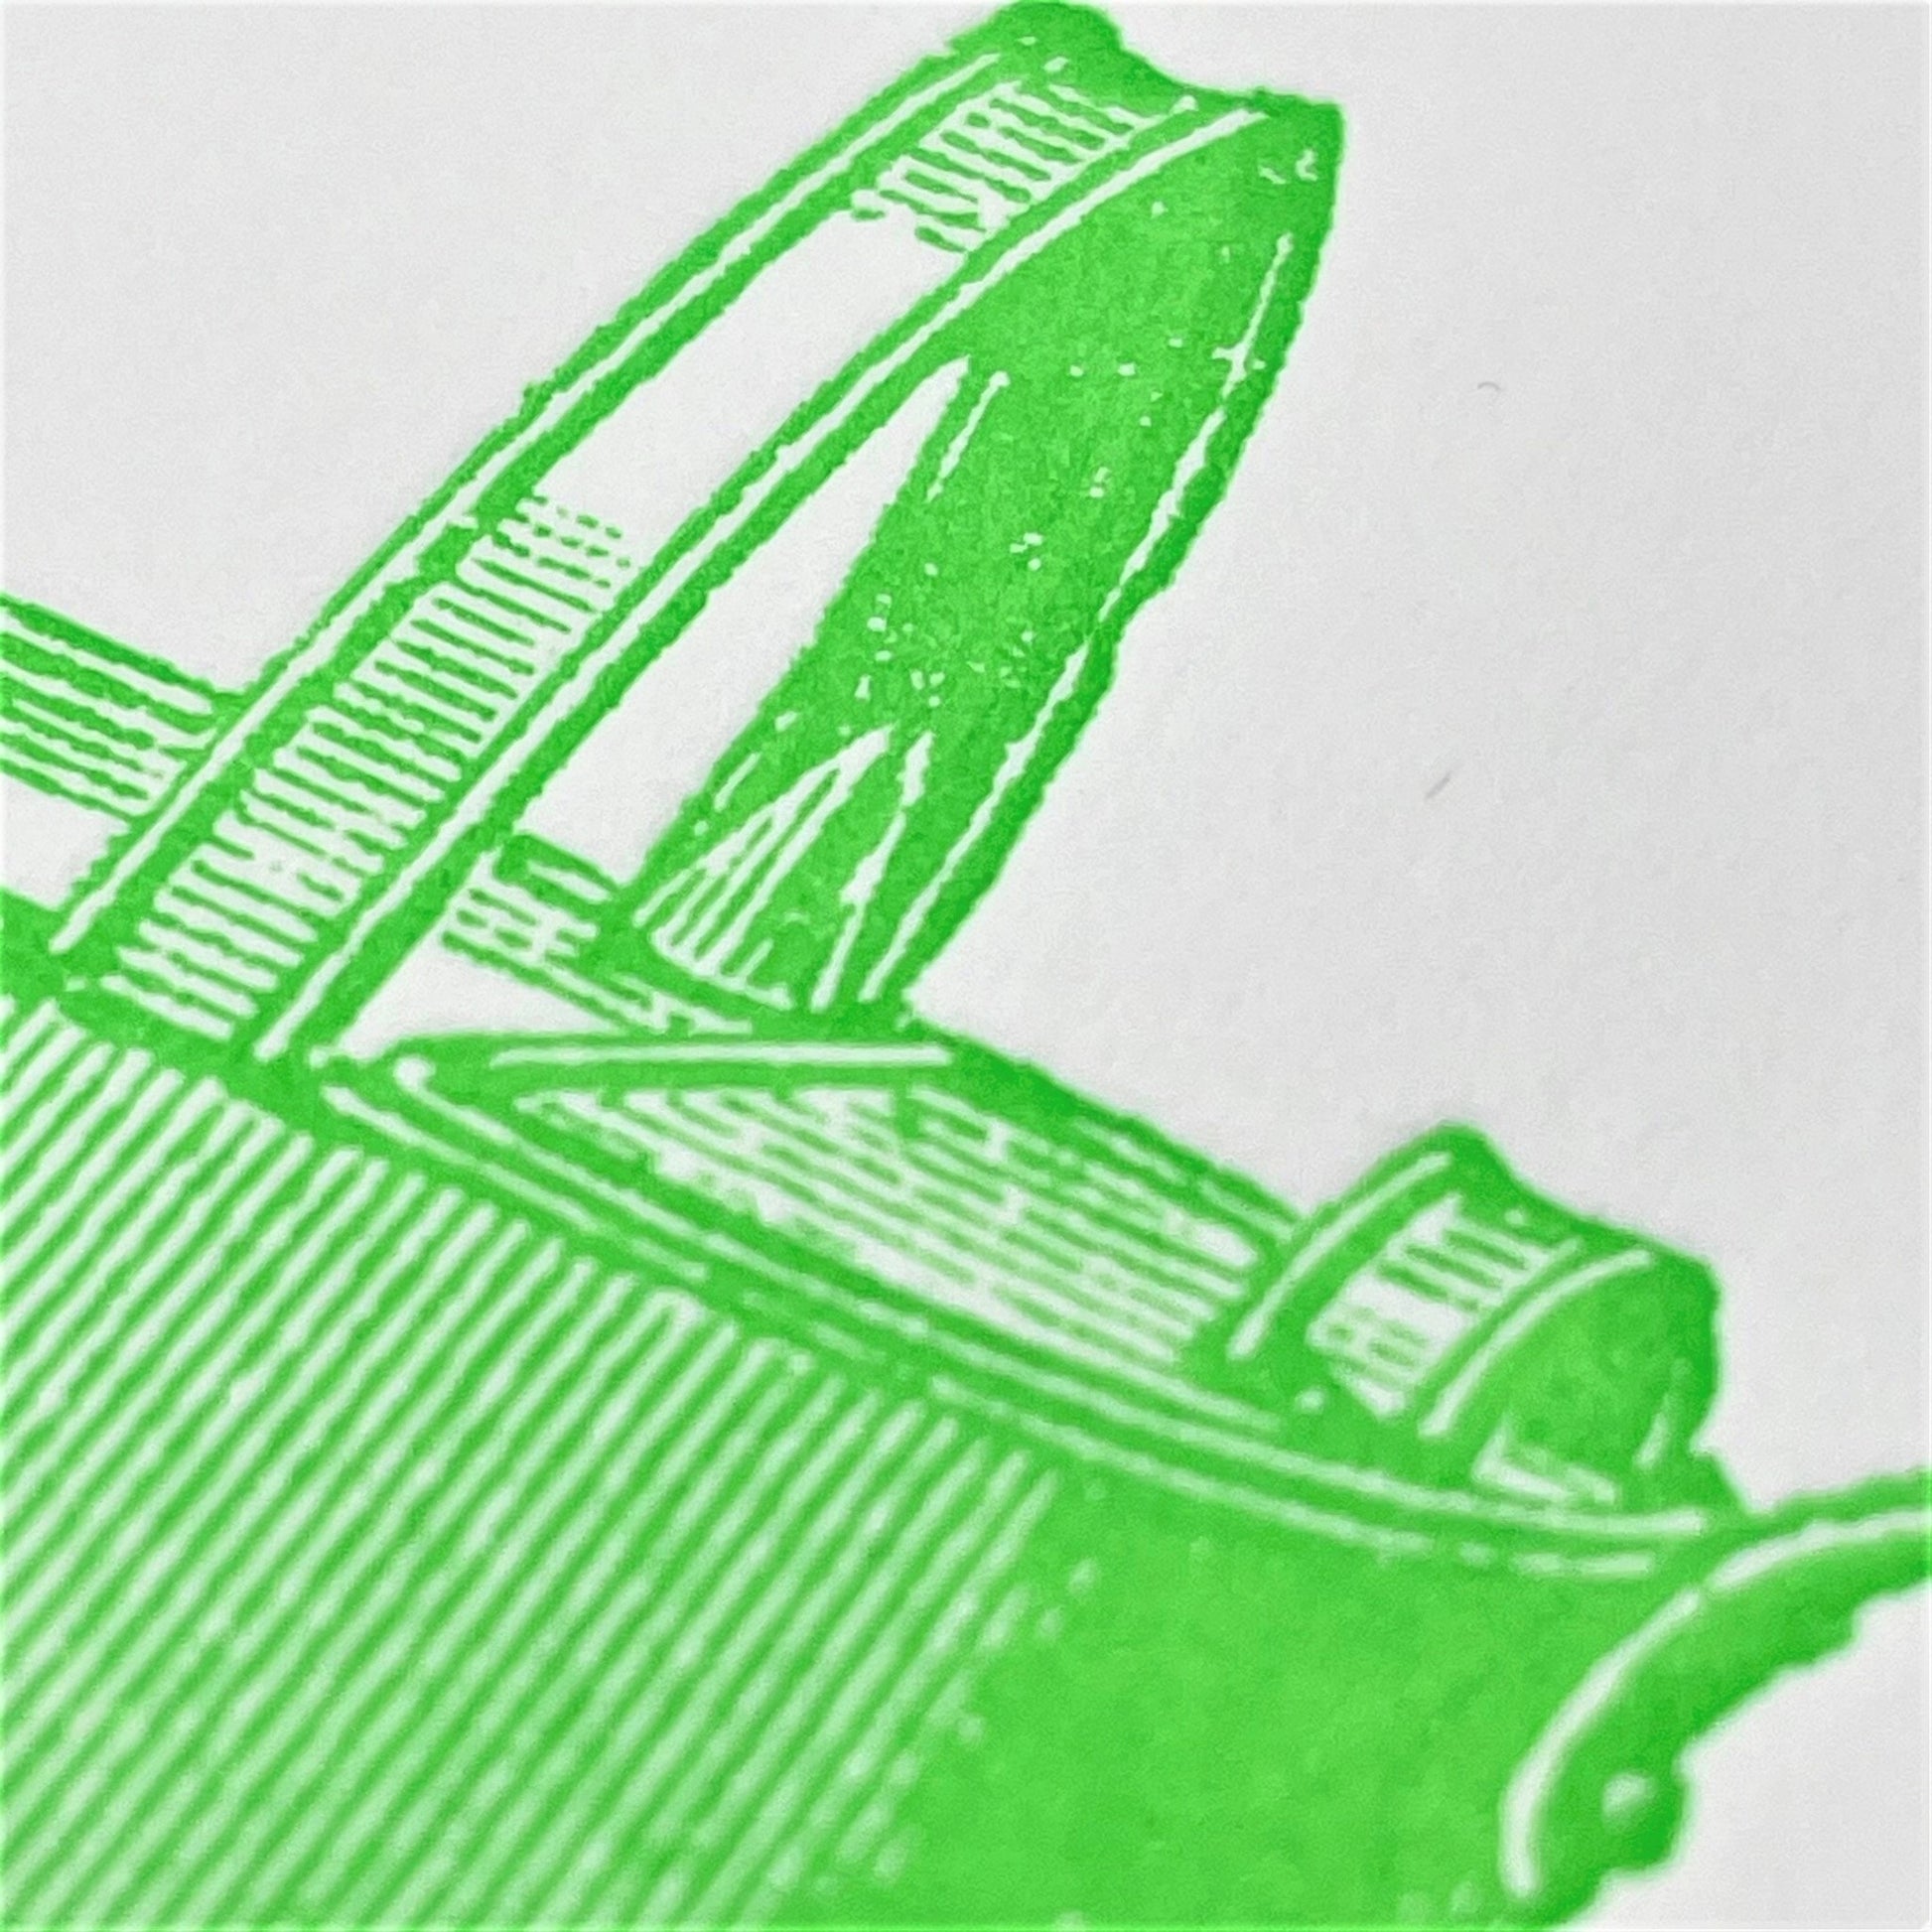 letterpress greetings card of a drawing of a watering can, lime green ink on white, close-up